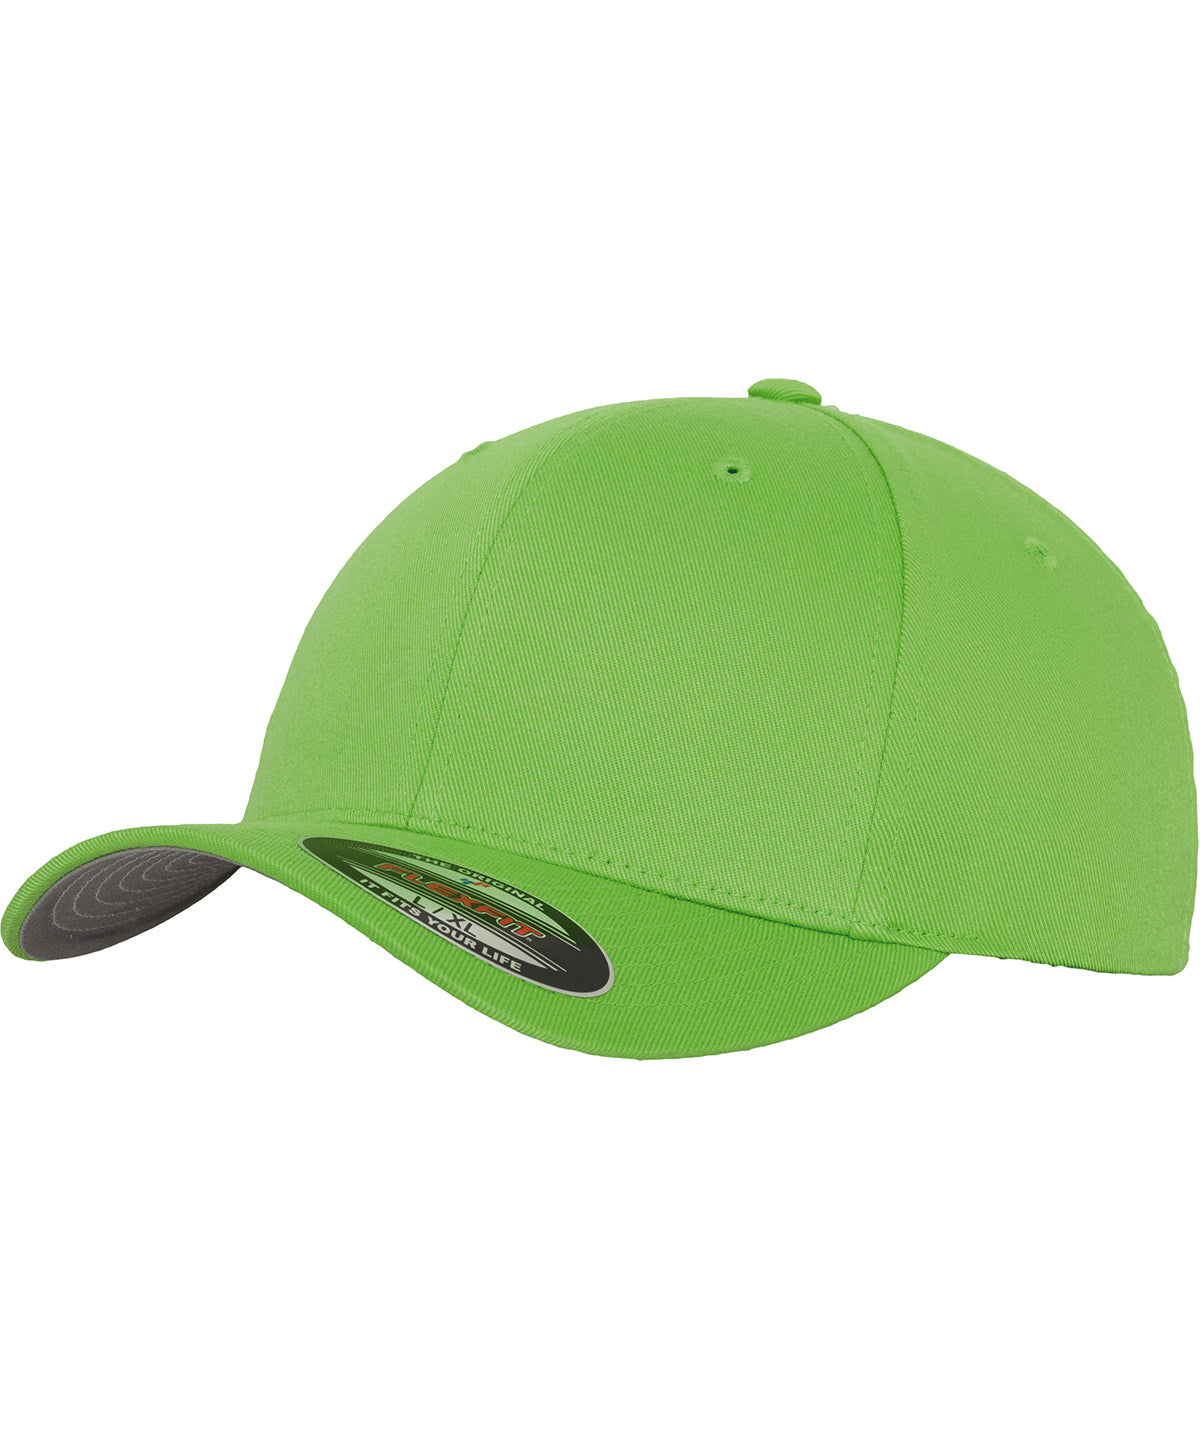 Fresh Green - Flexfit fitted baseball cap (6277) Caps Flexfit by Yupoong 2022 Spring Edit, Headwear, Must Haves, New Colours for 2023, Rebrandable, Summer Accessories Schoolwear Centres